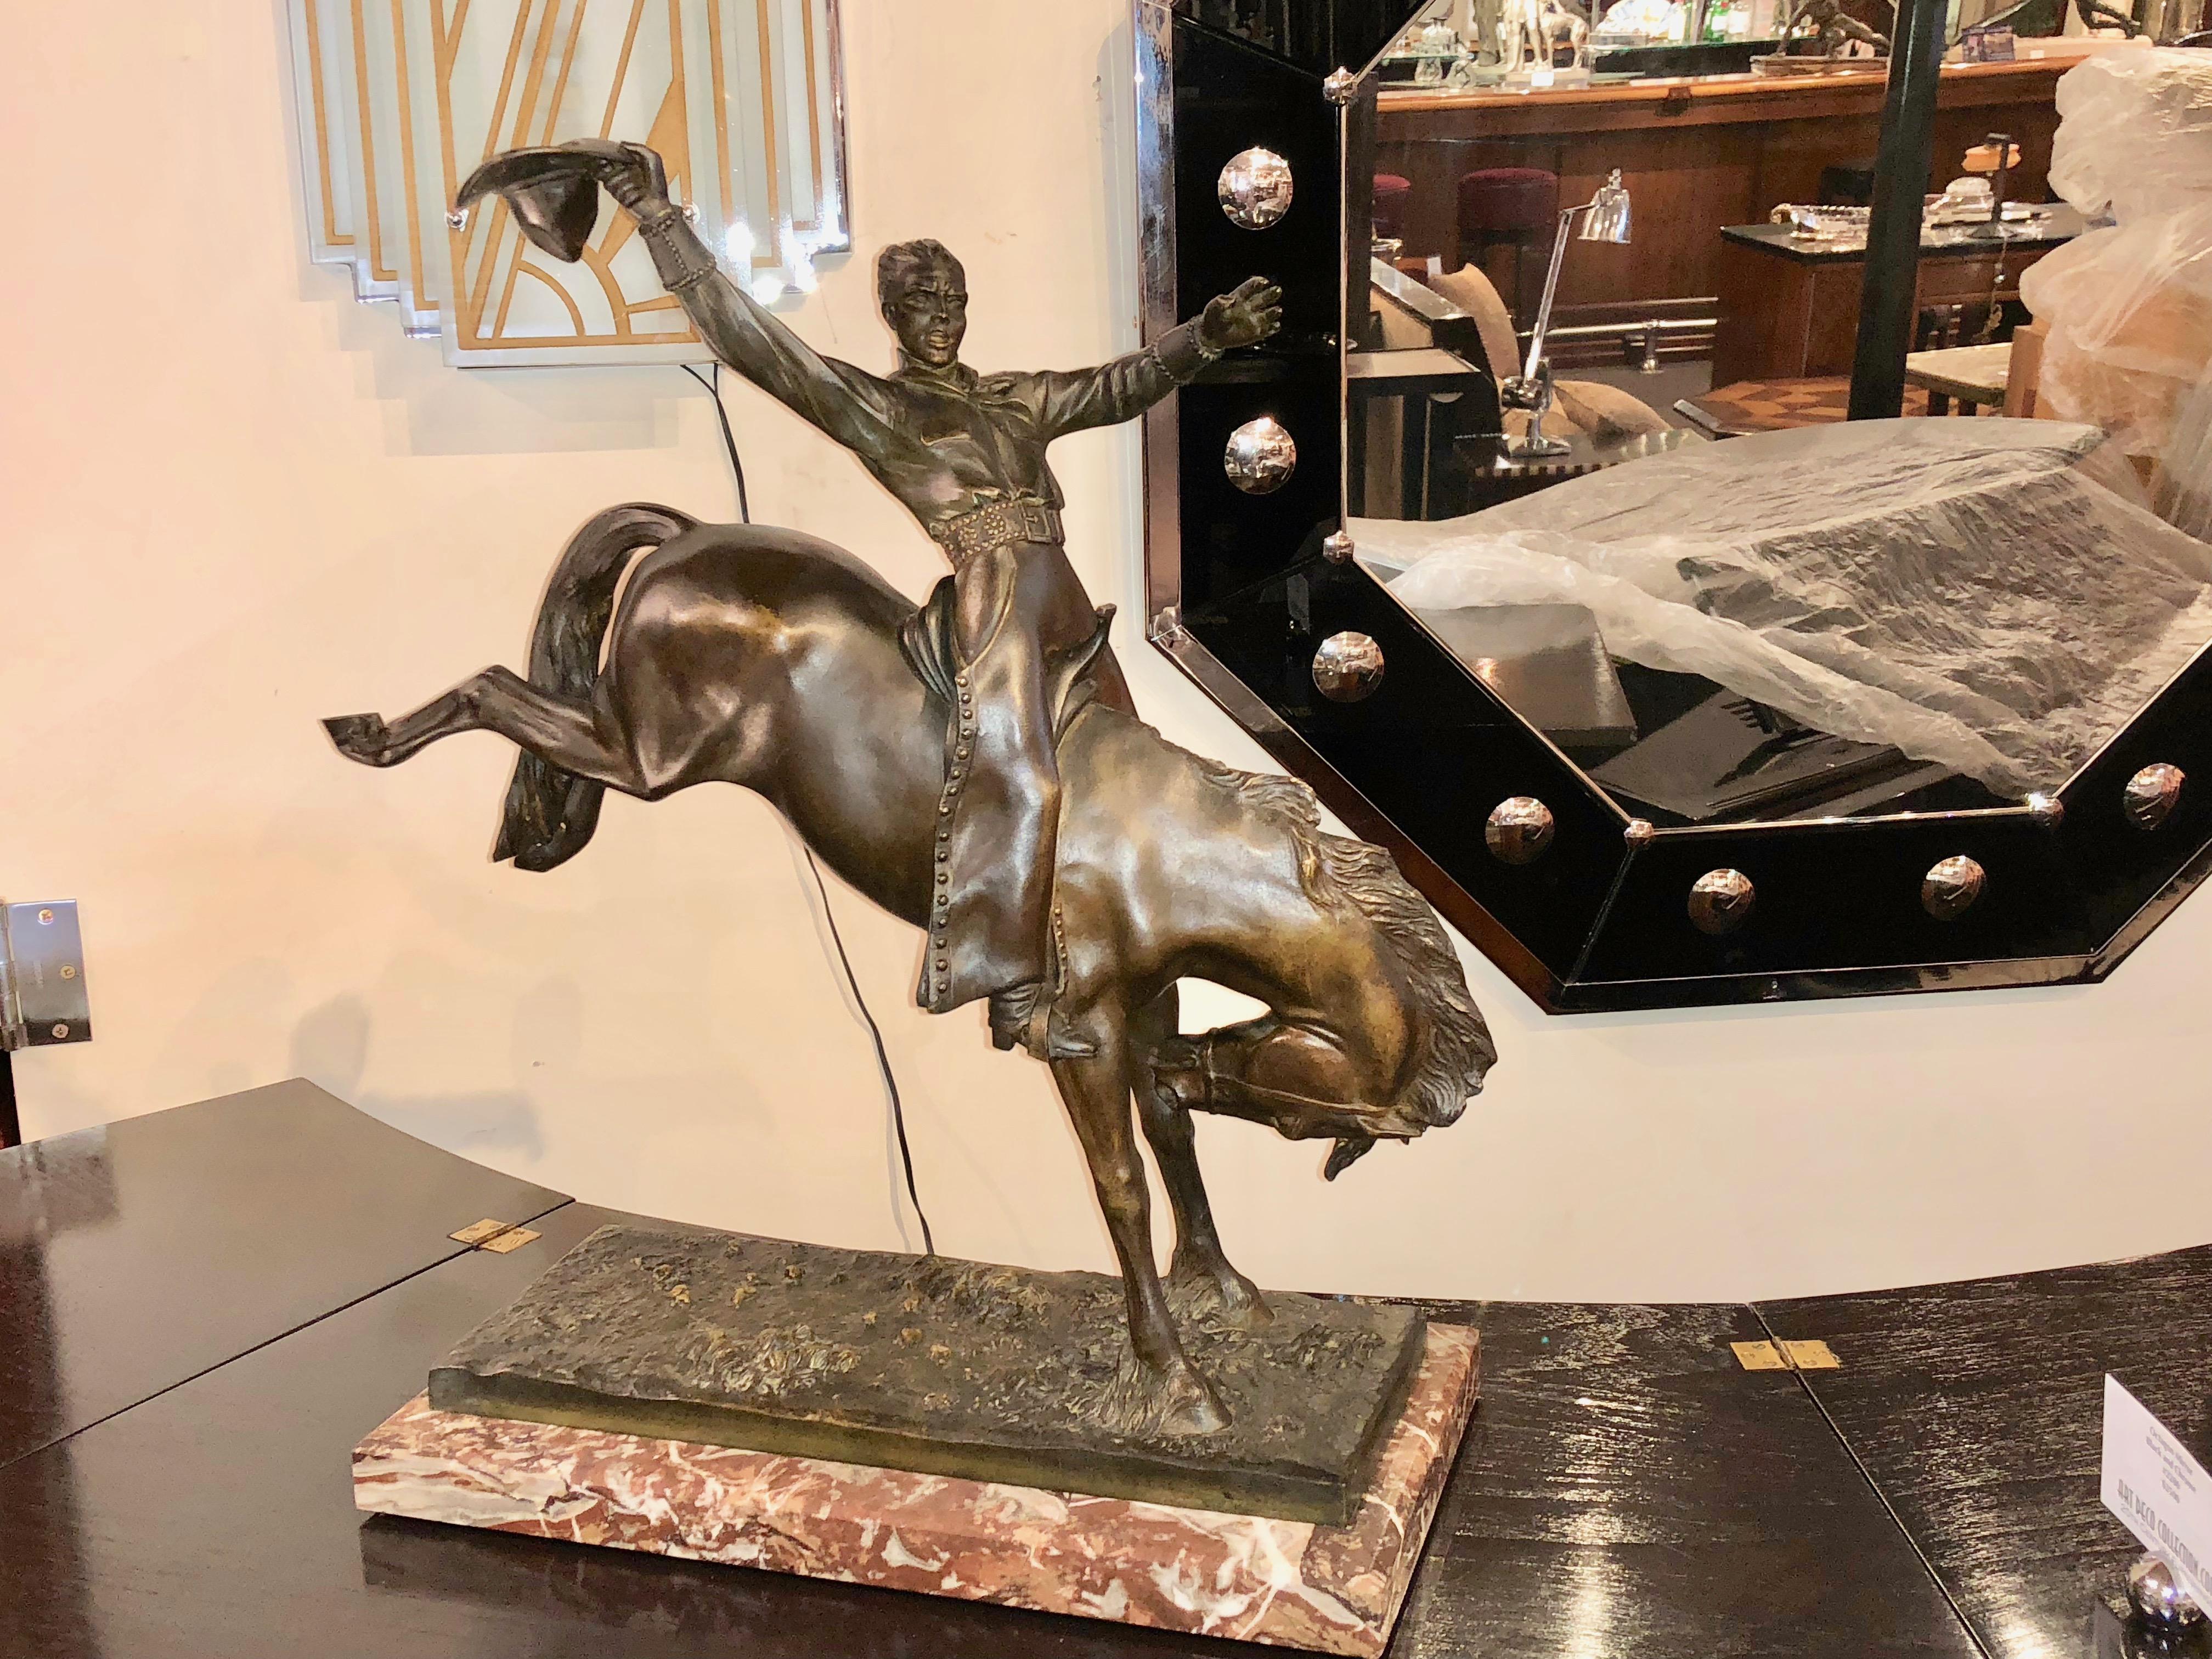 A rare tall bronze sculpture by Maurice Guiraud Rivière & Etling Paris representing the figure of a cowboy at the rodeo on a bucking bronco.
Stunning high quality Etling edition foundry with detailed chasing. Genuine brown patina and marble base.